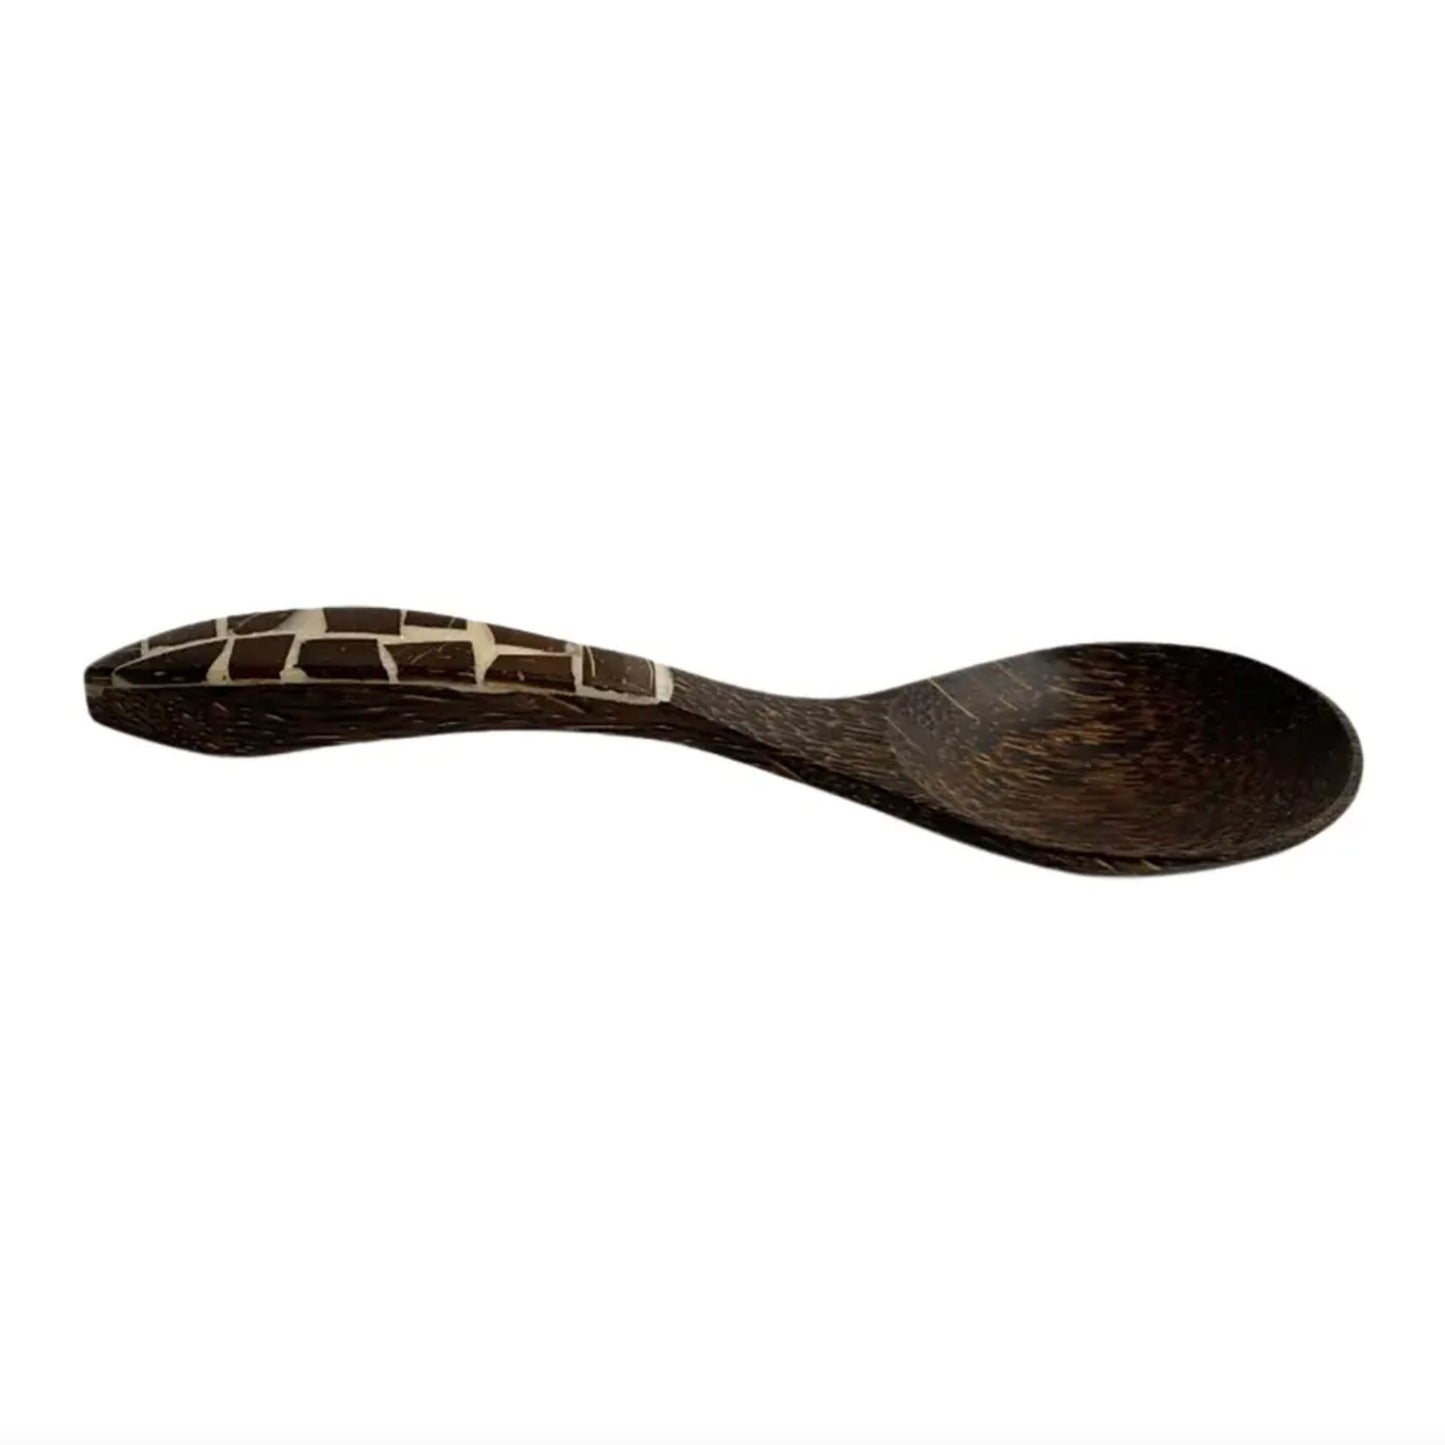 Coconut Wood Serving Spoon with Coconut Inlay